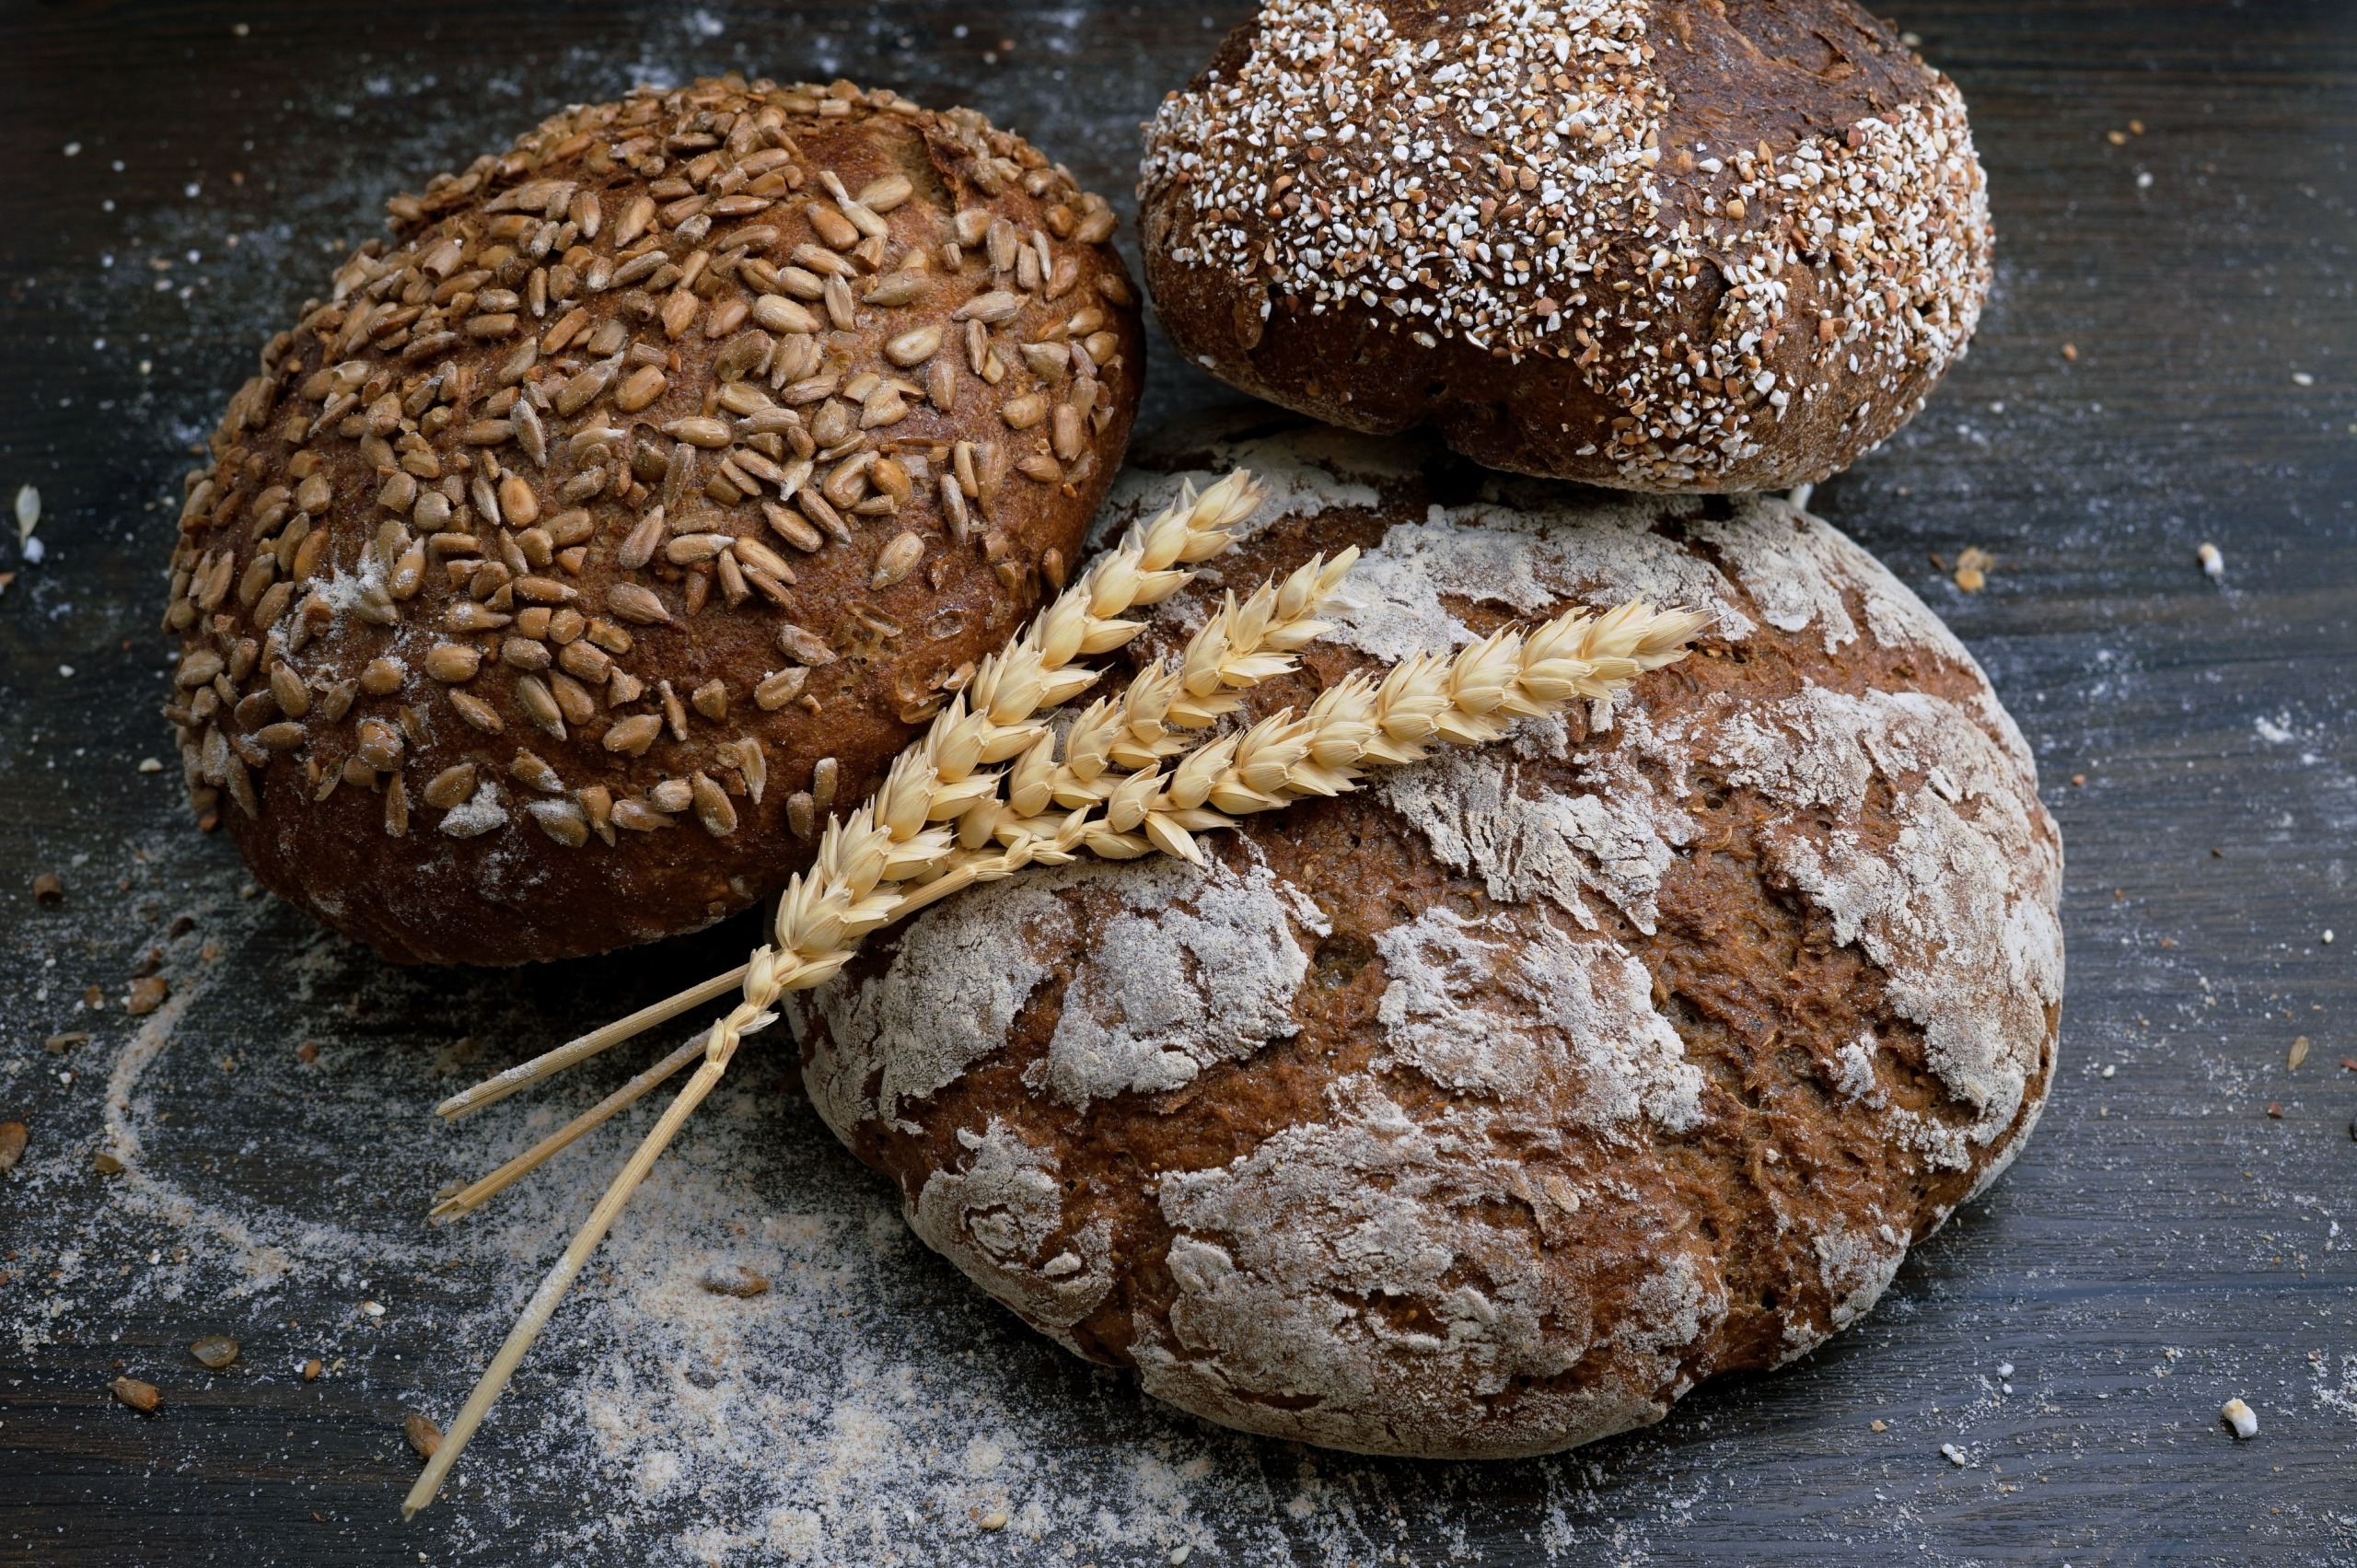 gluten-free-hat-can-be-expected-to-improve-diet-and-skin-quality